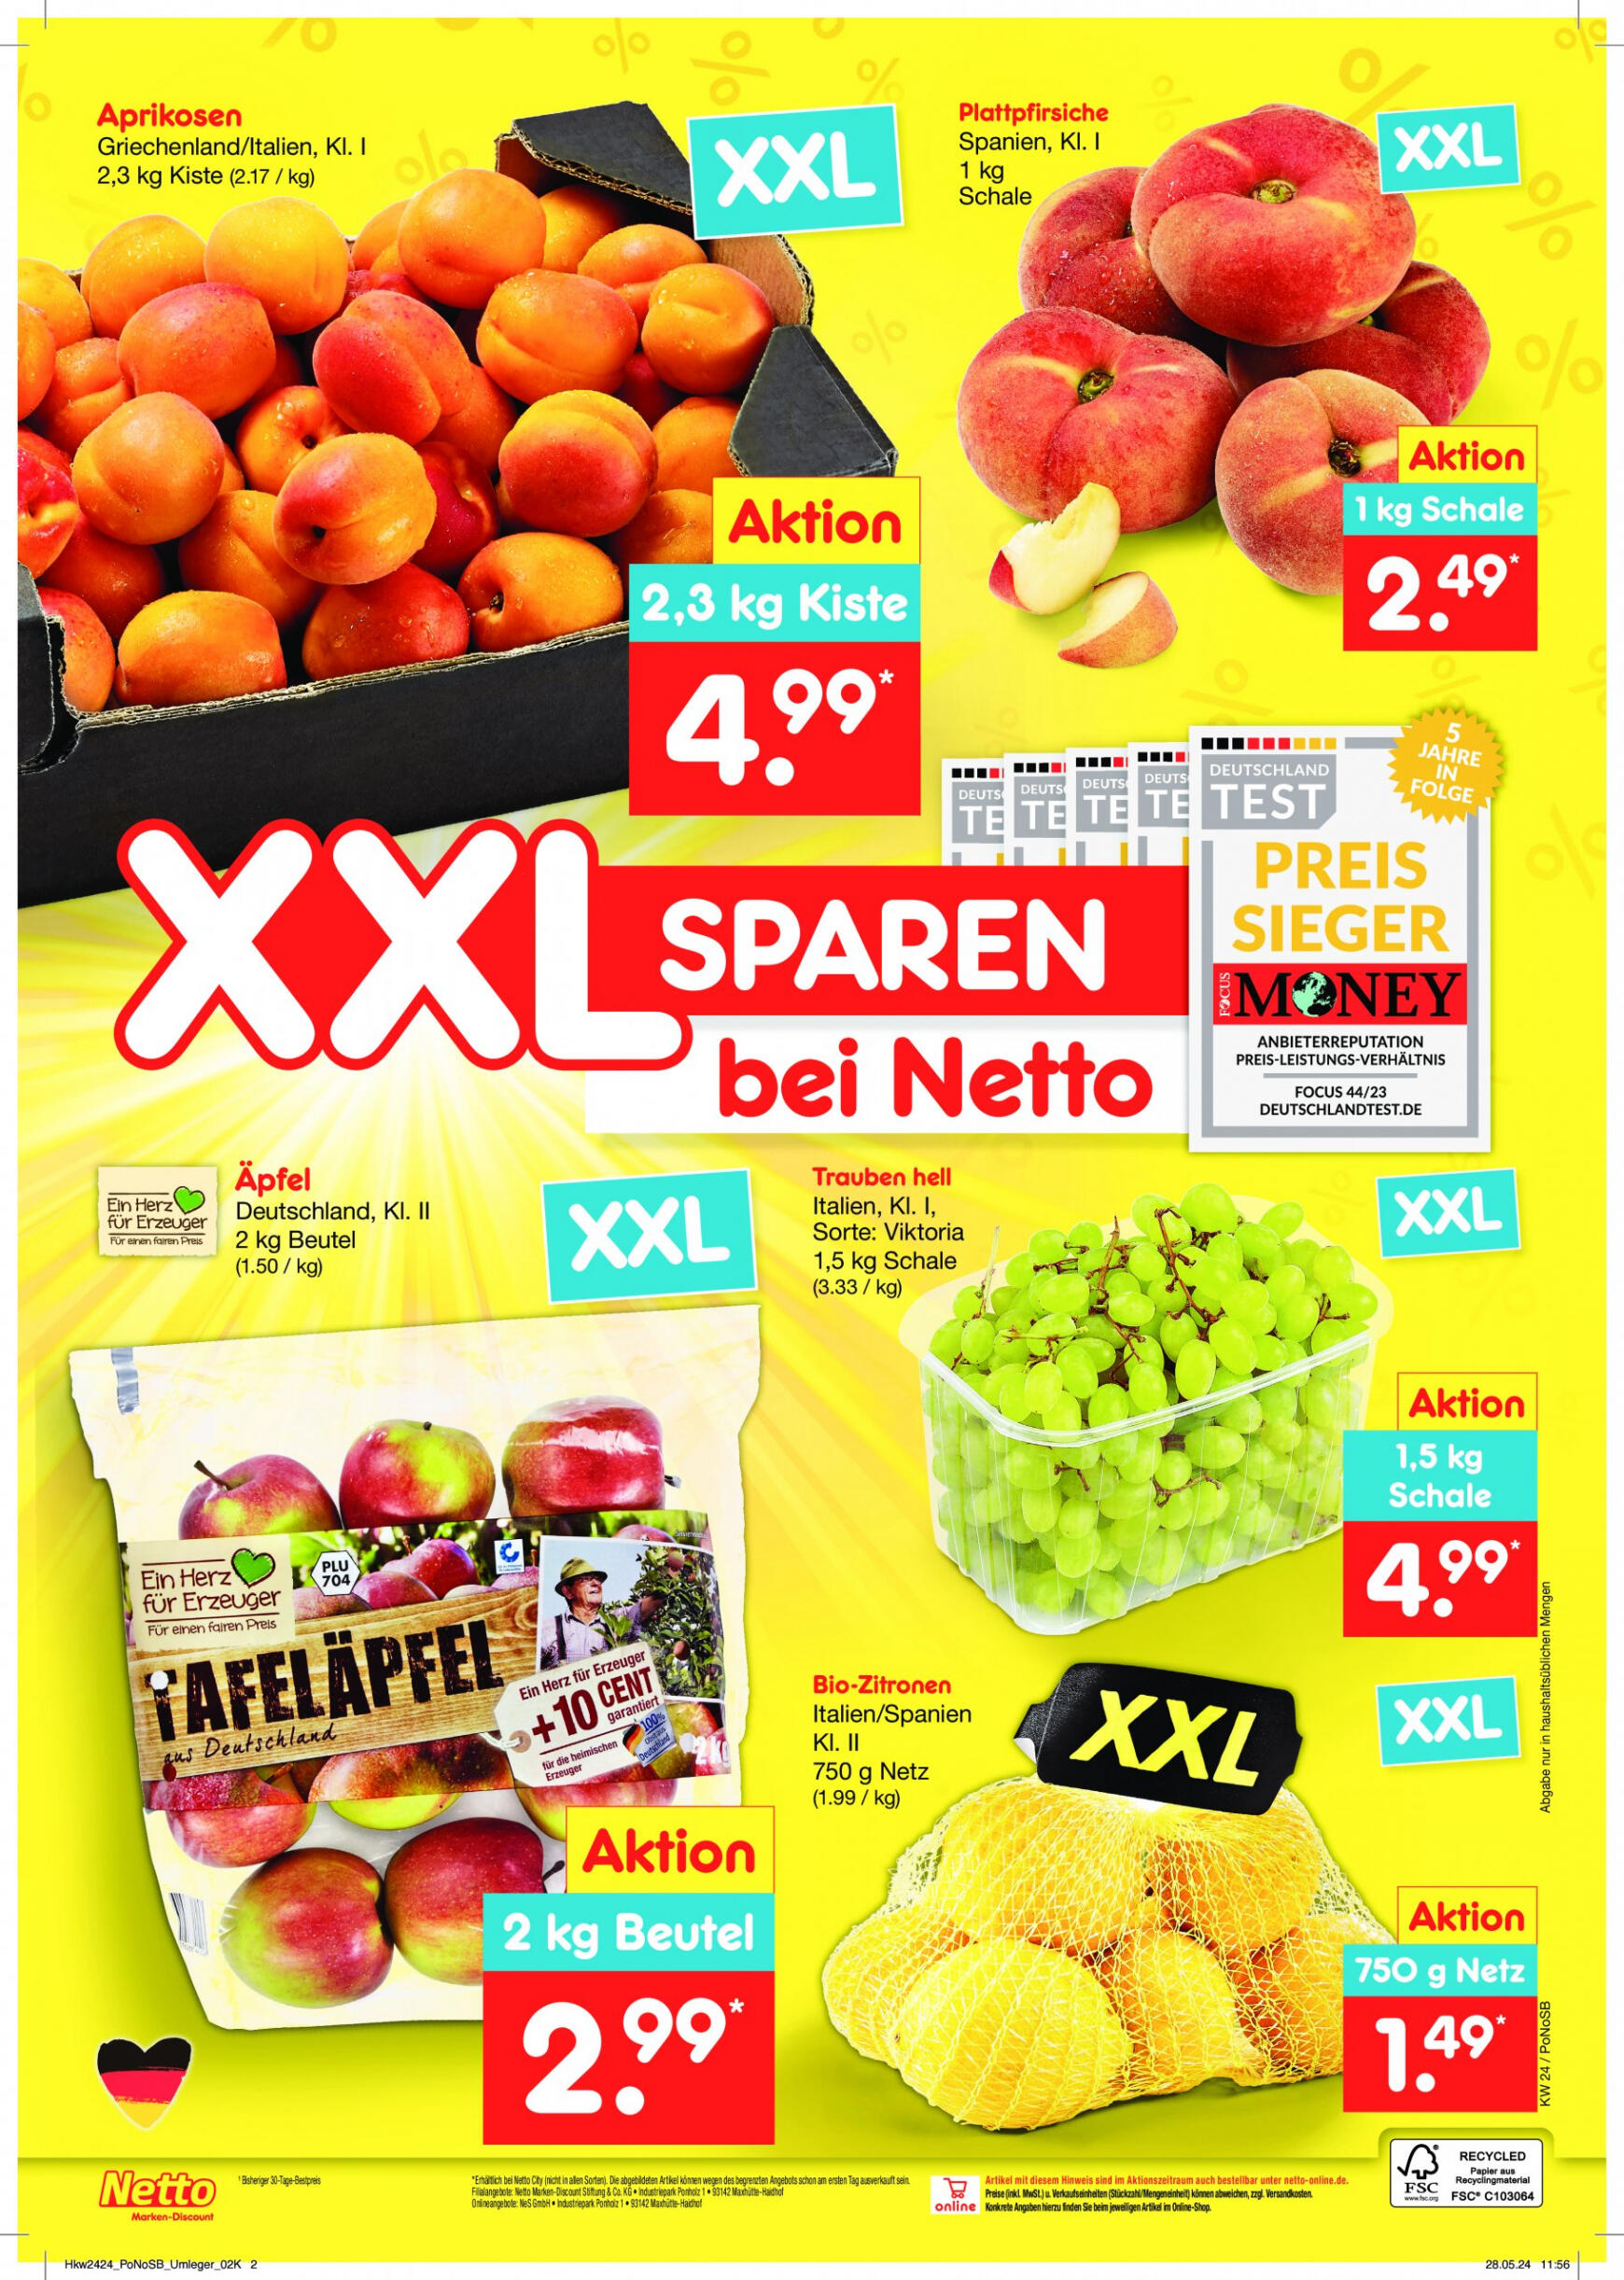 netto - Flyer Netto aktuell 10.06. - 15.06. - page: 3